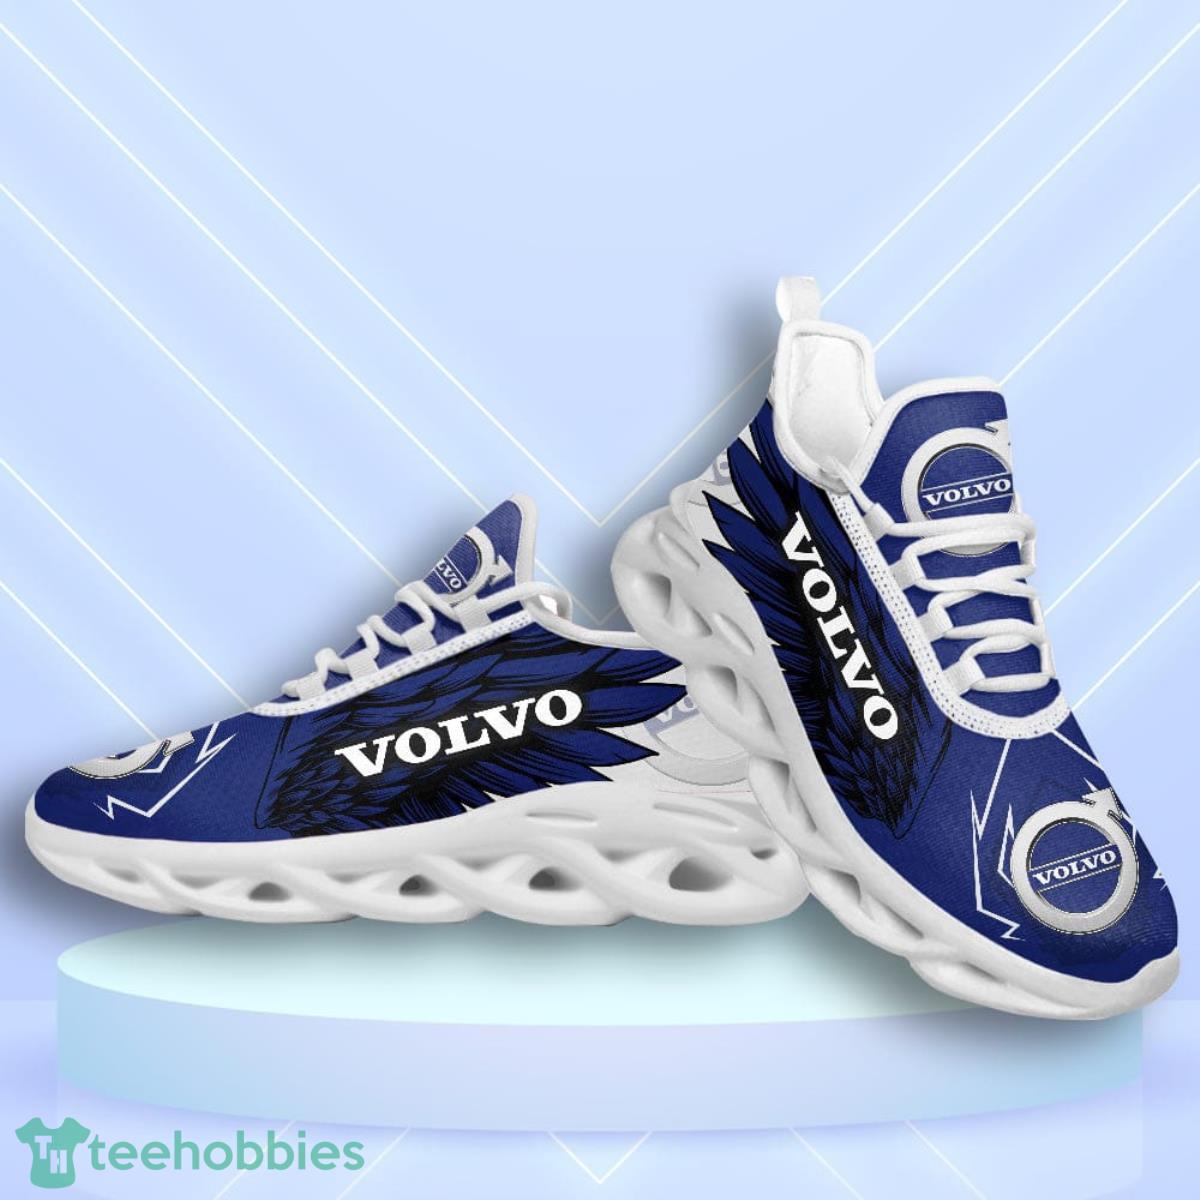 AB Volvo Team Max Soul Shoes Running Sneakers Product Photo 1